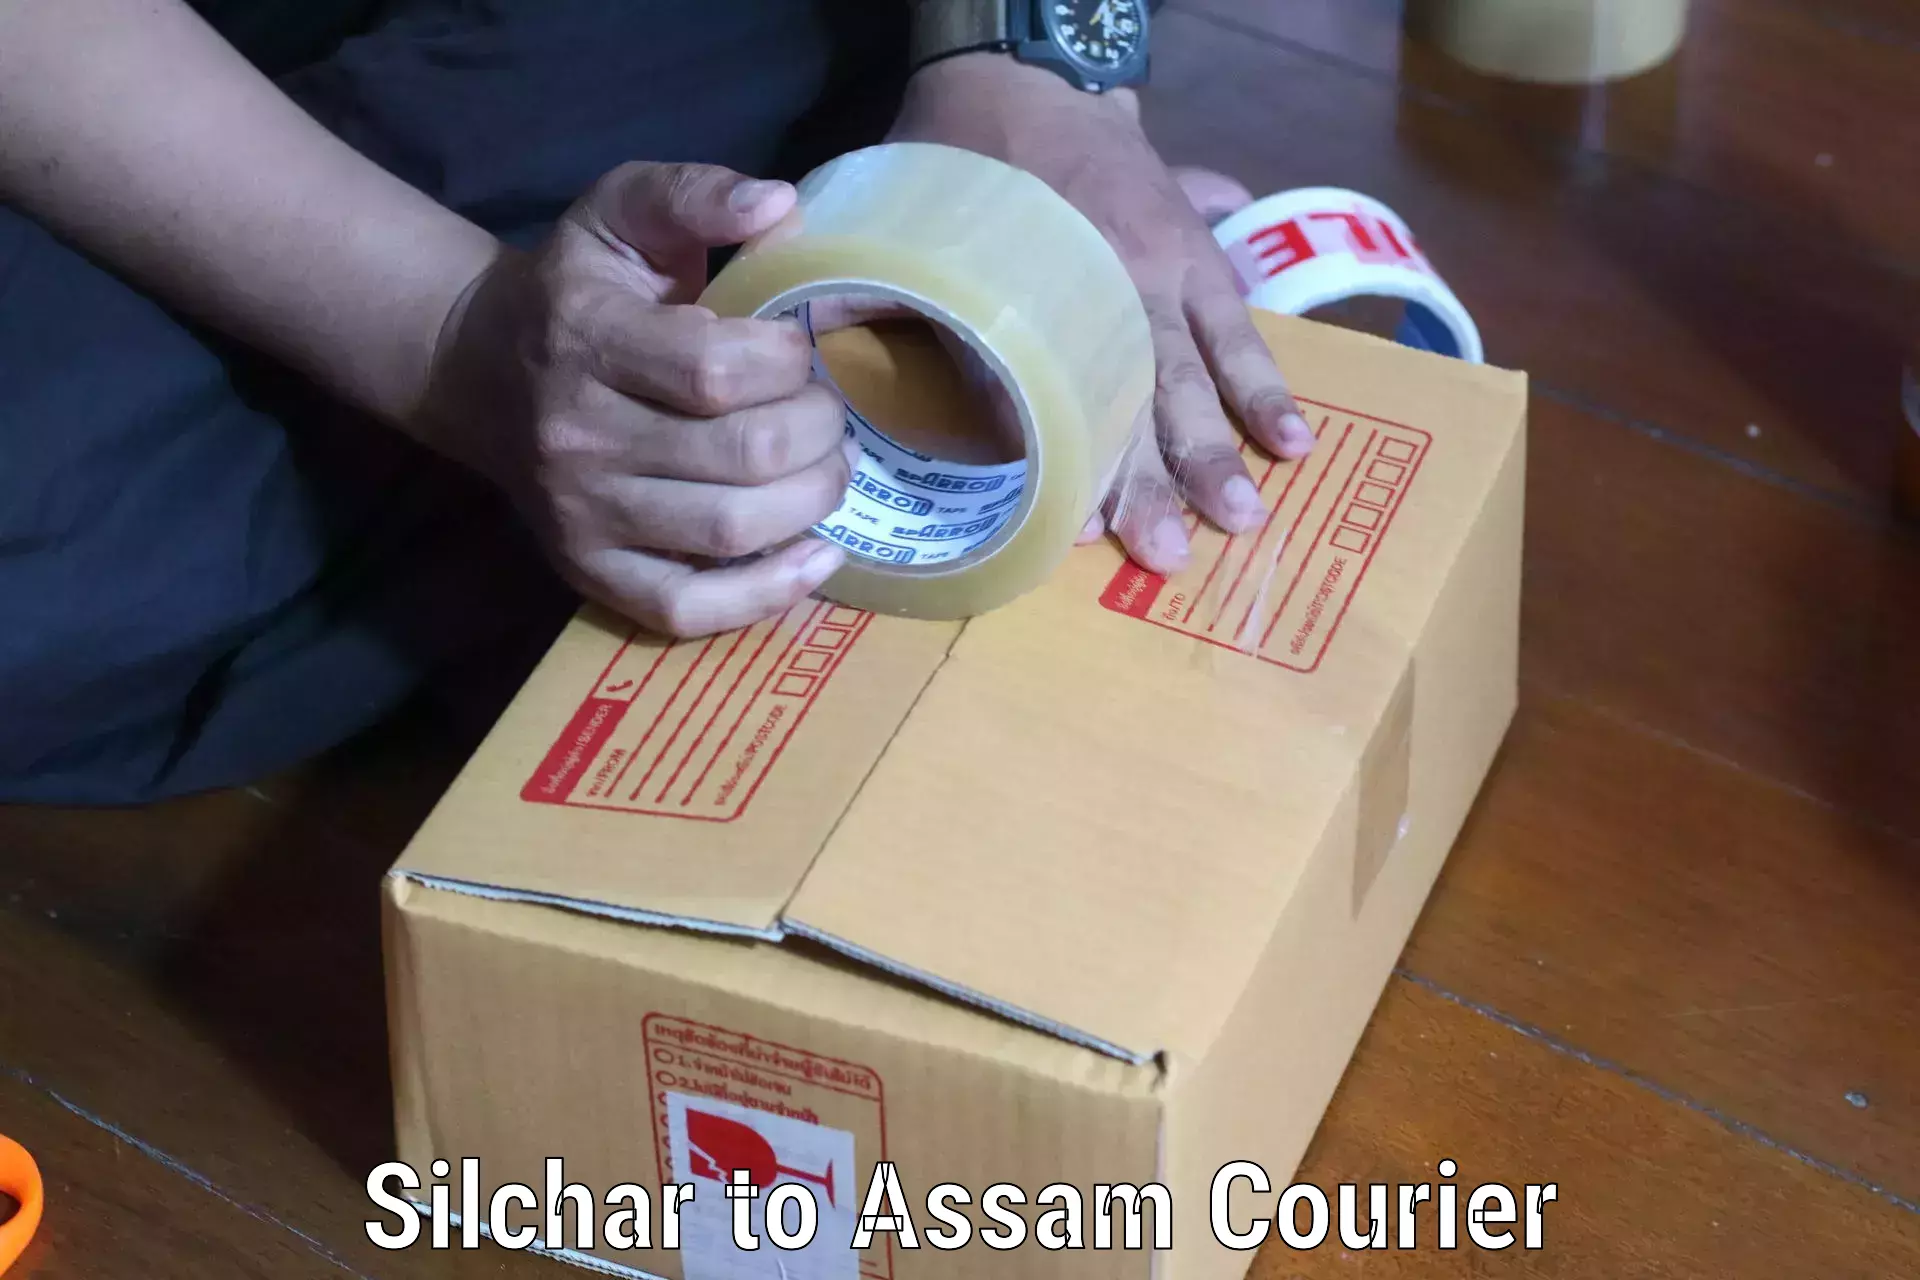 Next-day delivery options Silchar to Dima Hasao